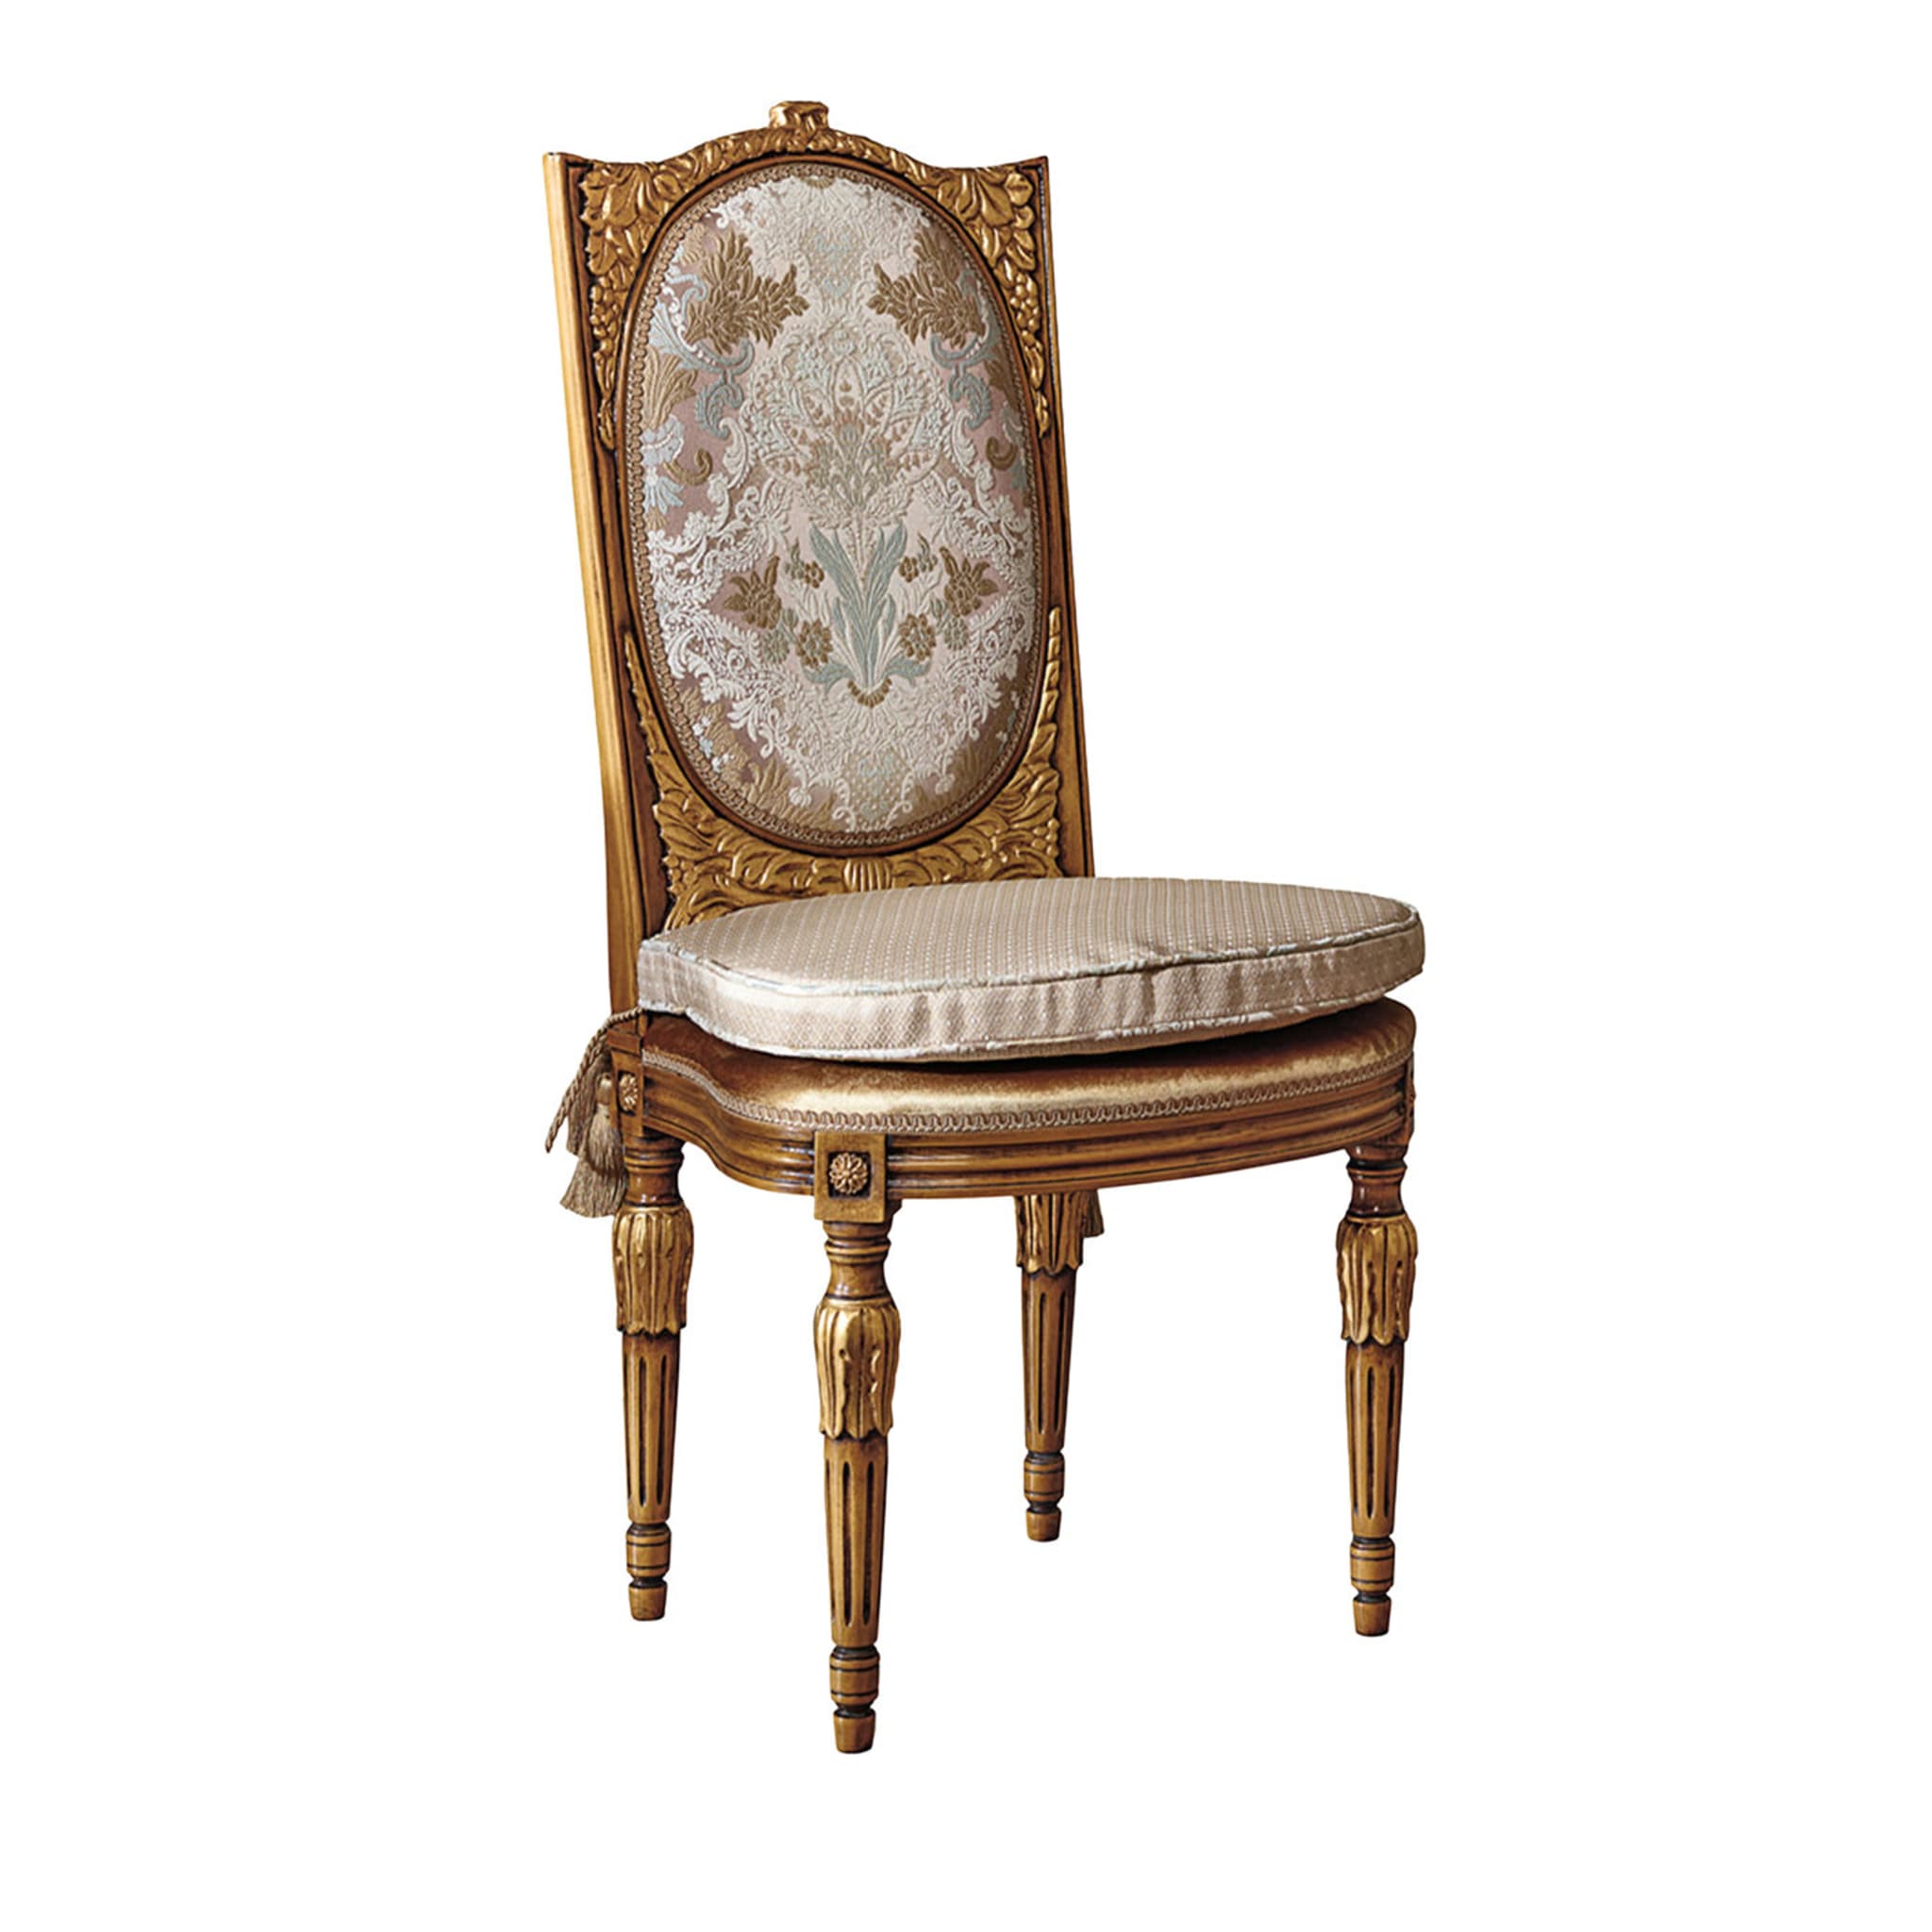 Upholstered Chair with Gold Inlays - Main view